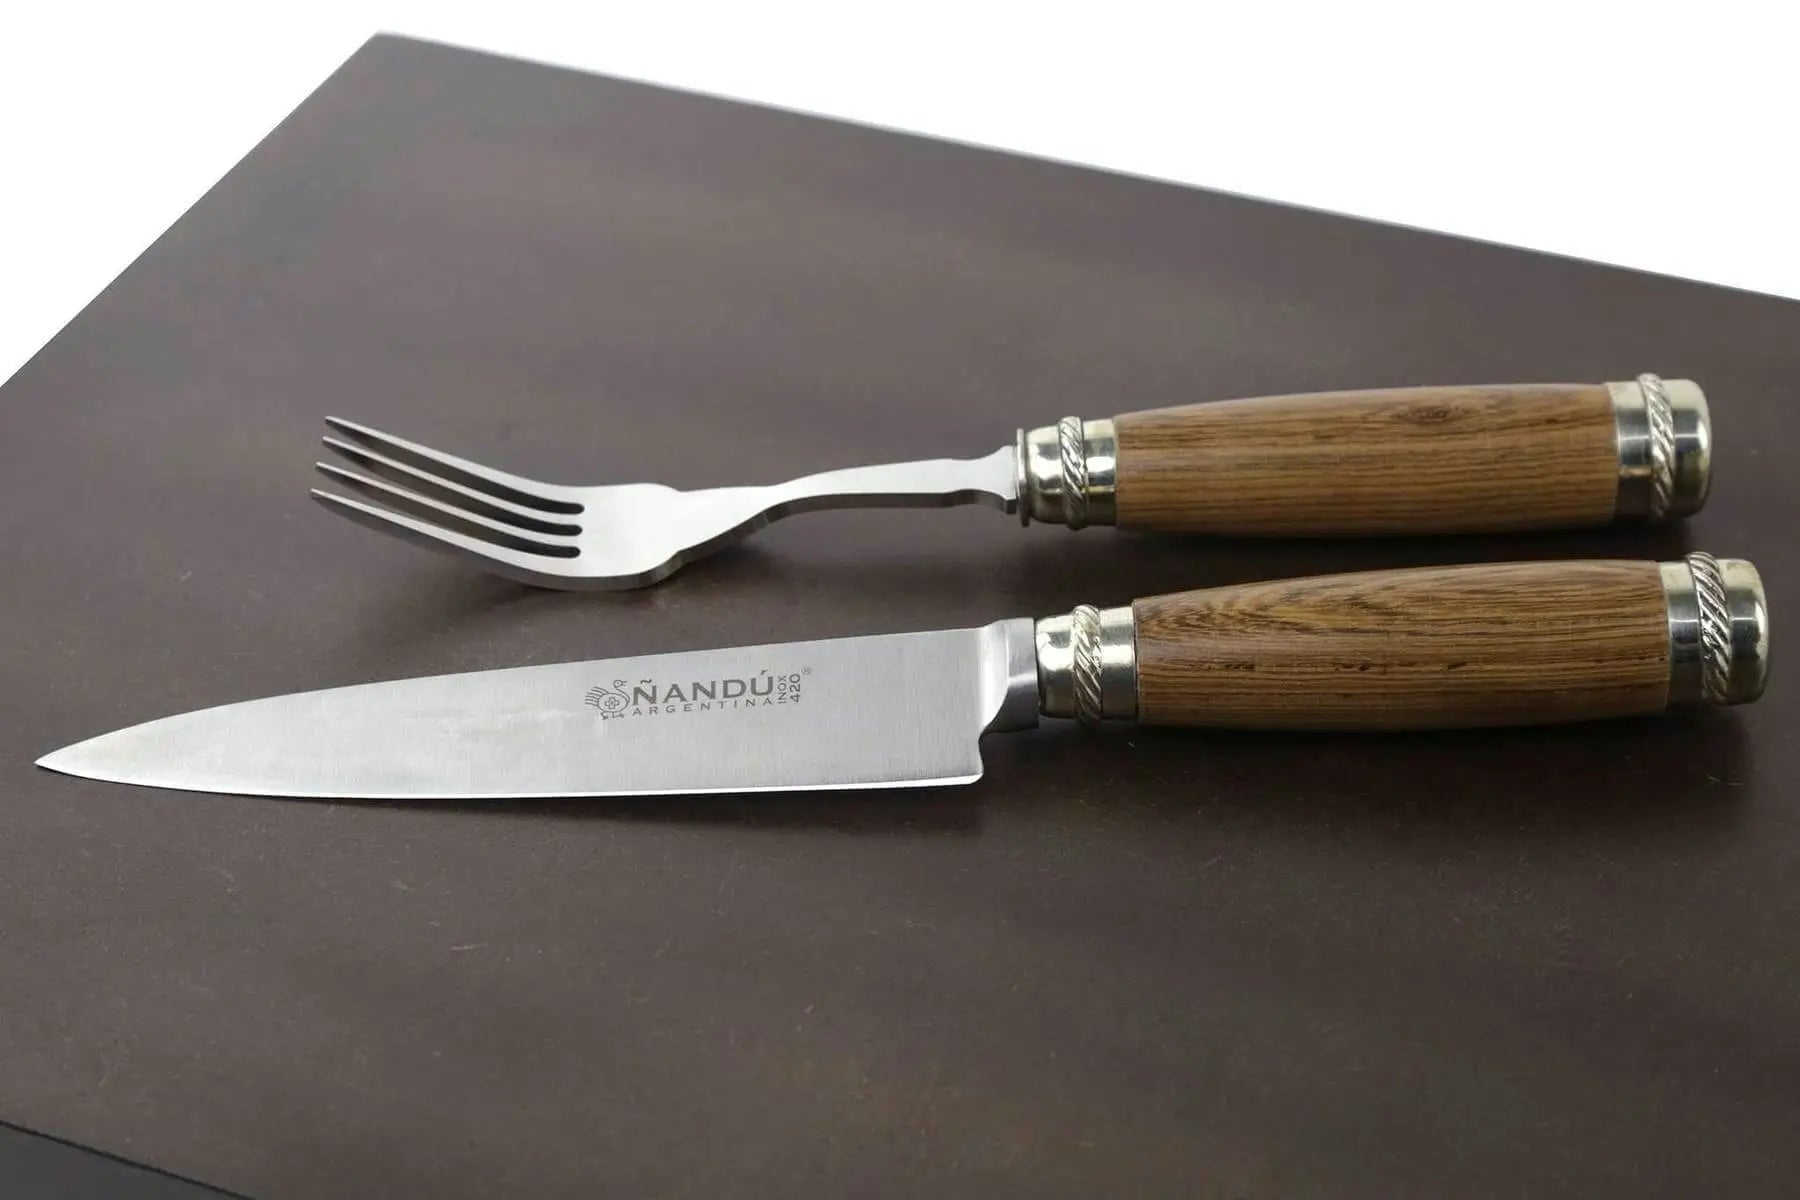 Steak Cutlery set with guayubira wood handles, stainless steel blades and wooden case